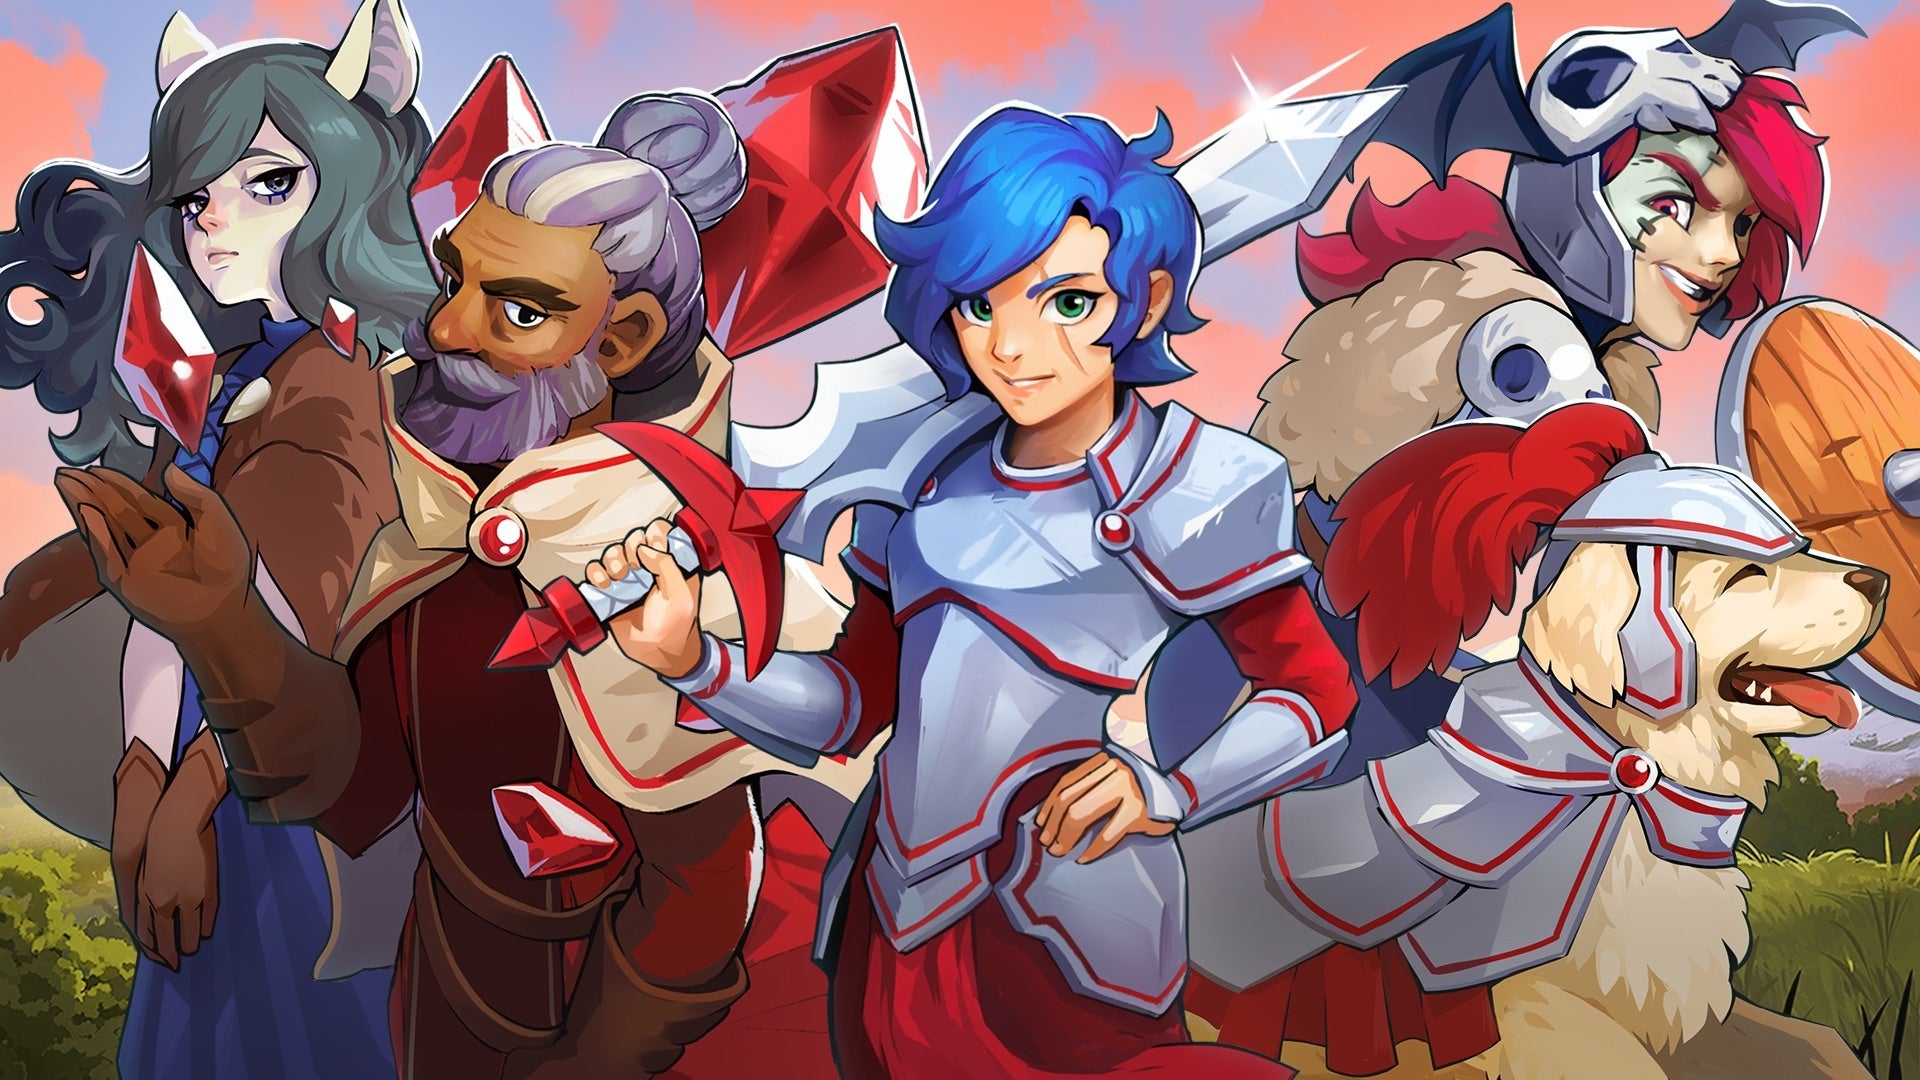 WARGROOVE PS4 Version Full Game Free Download